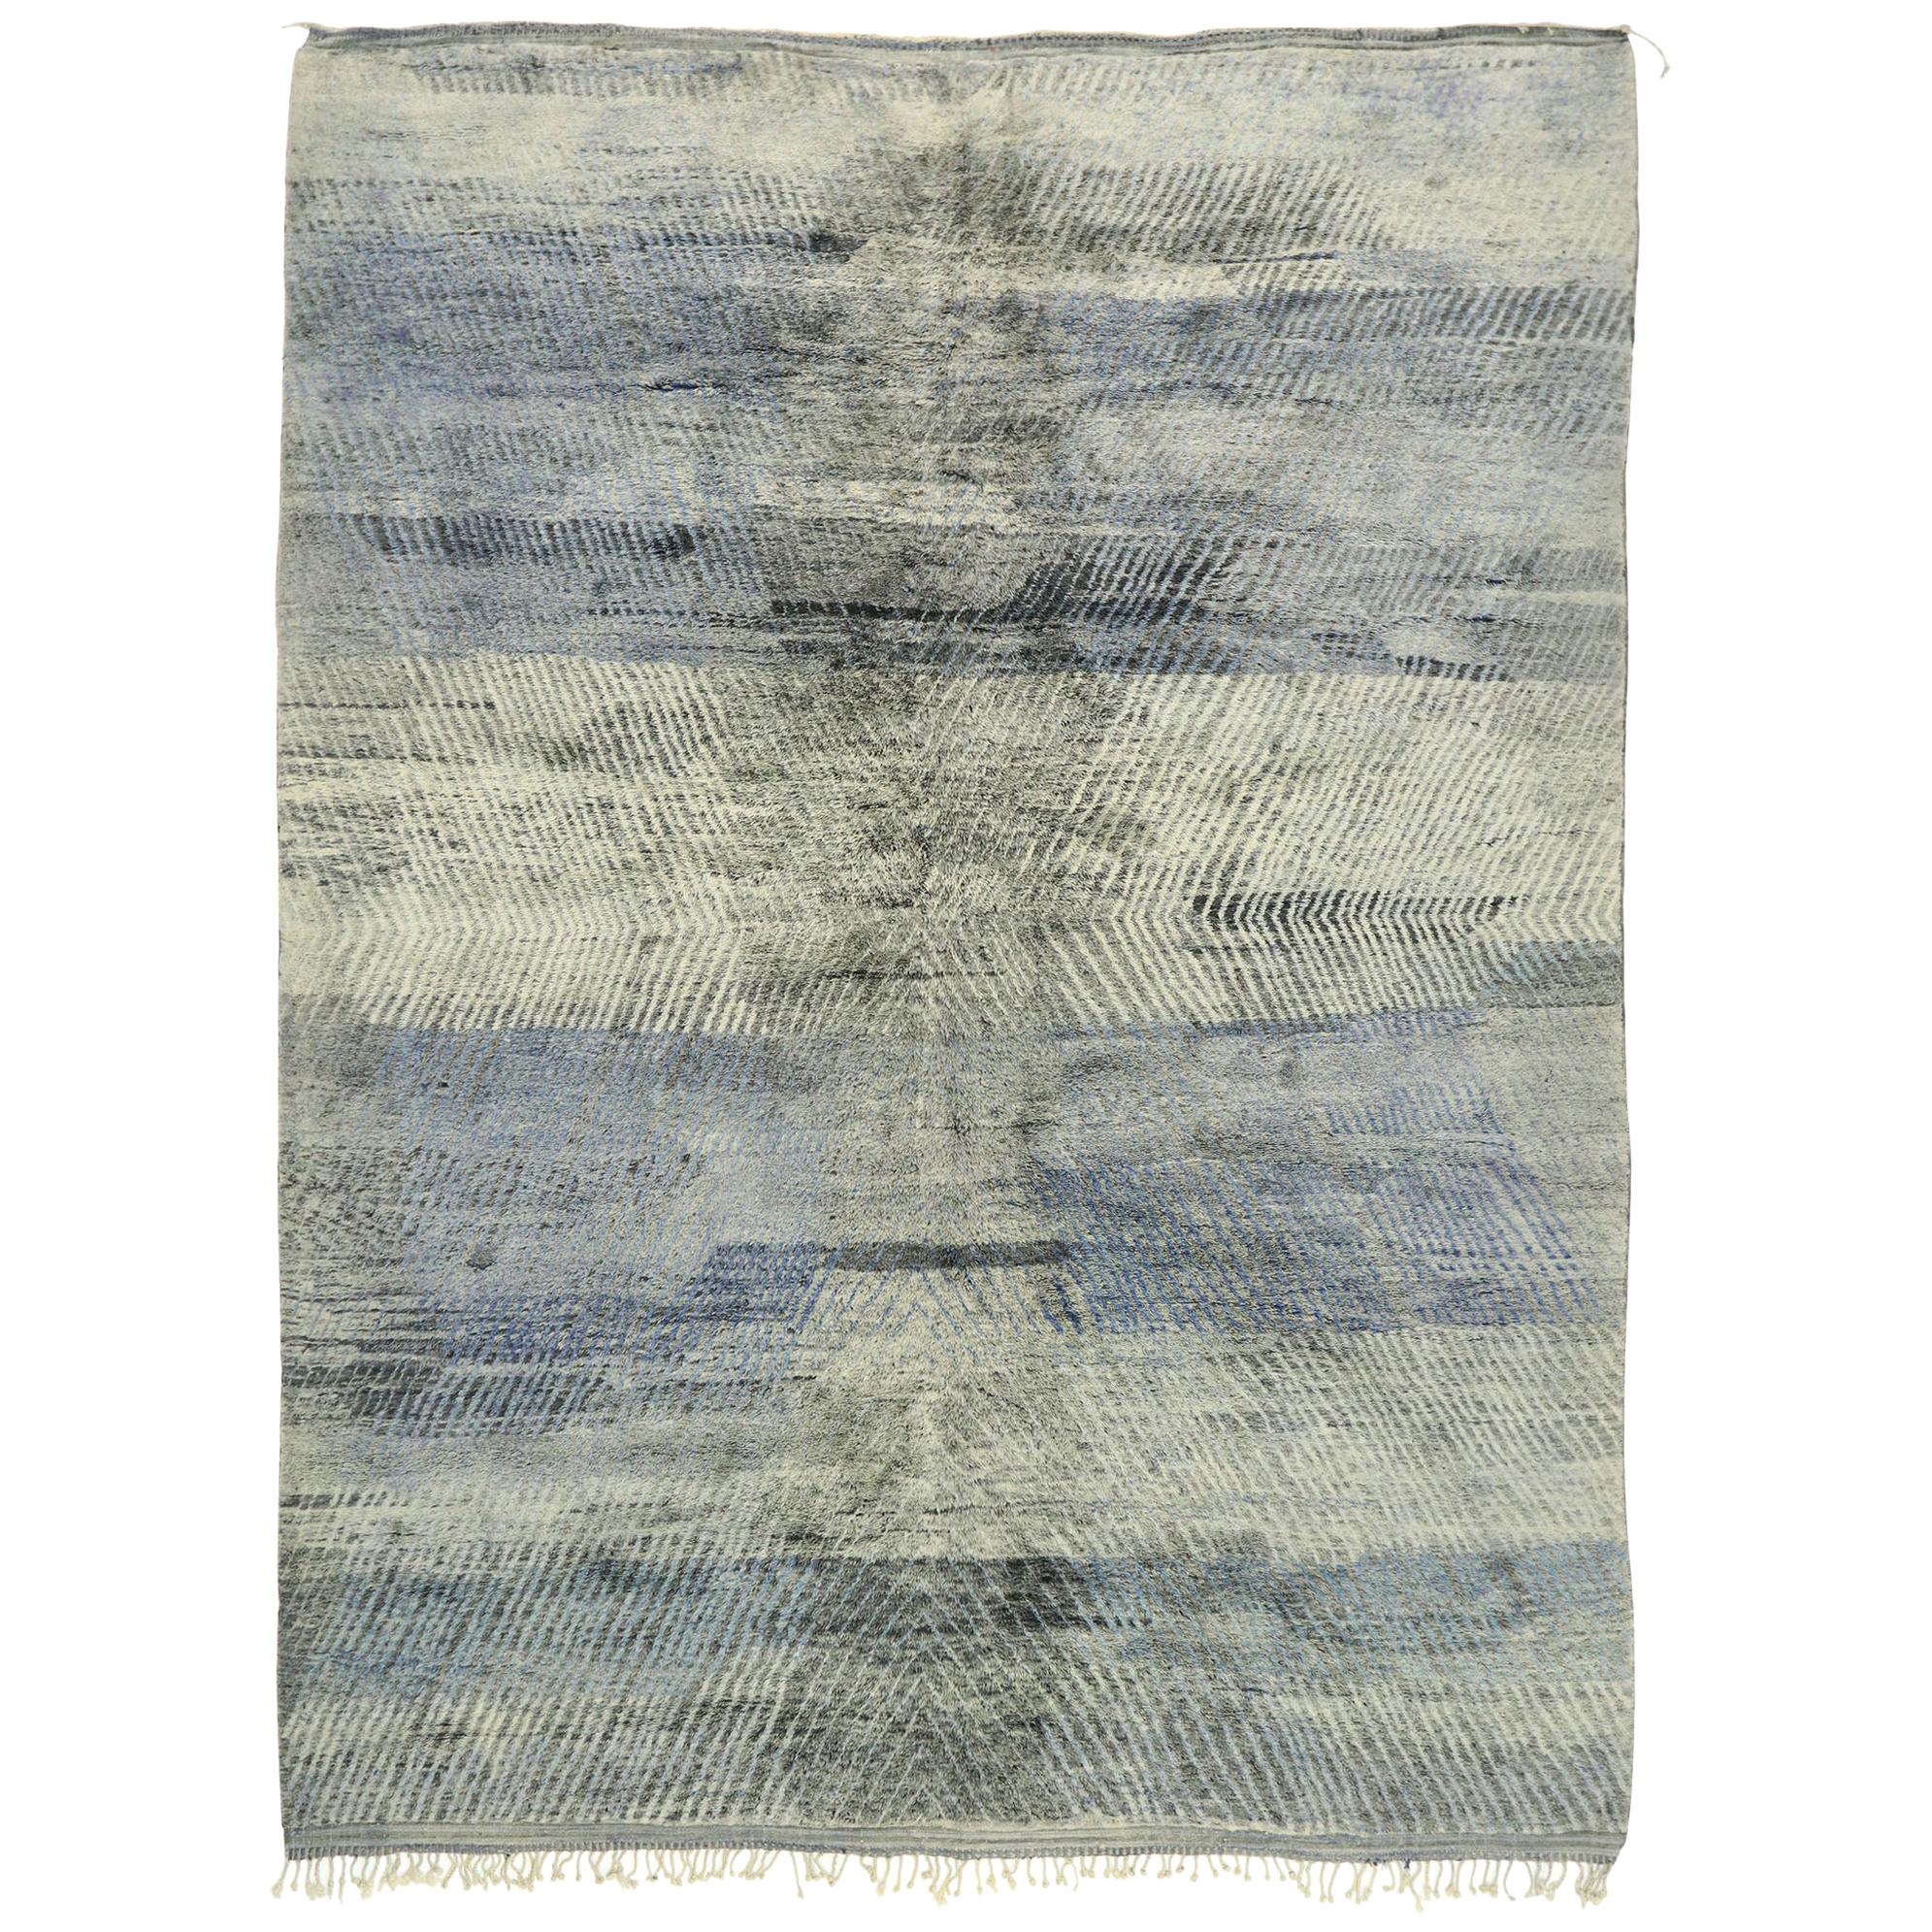 New Contemporary Berber Moroccan Rug with Abstract Linear Design and Plush Pile